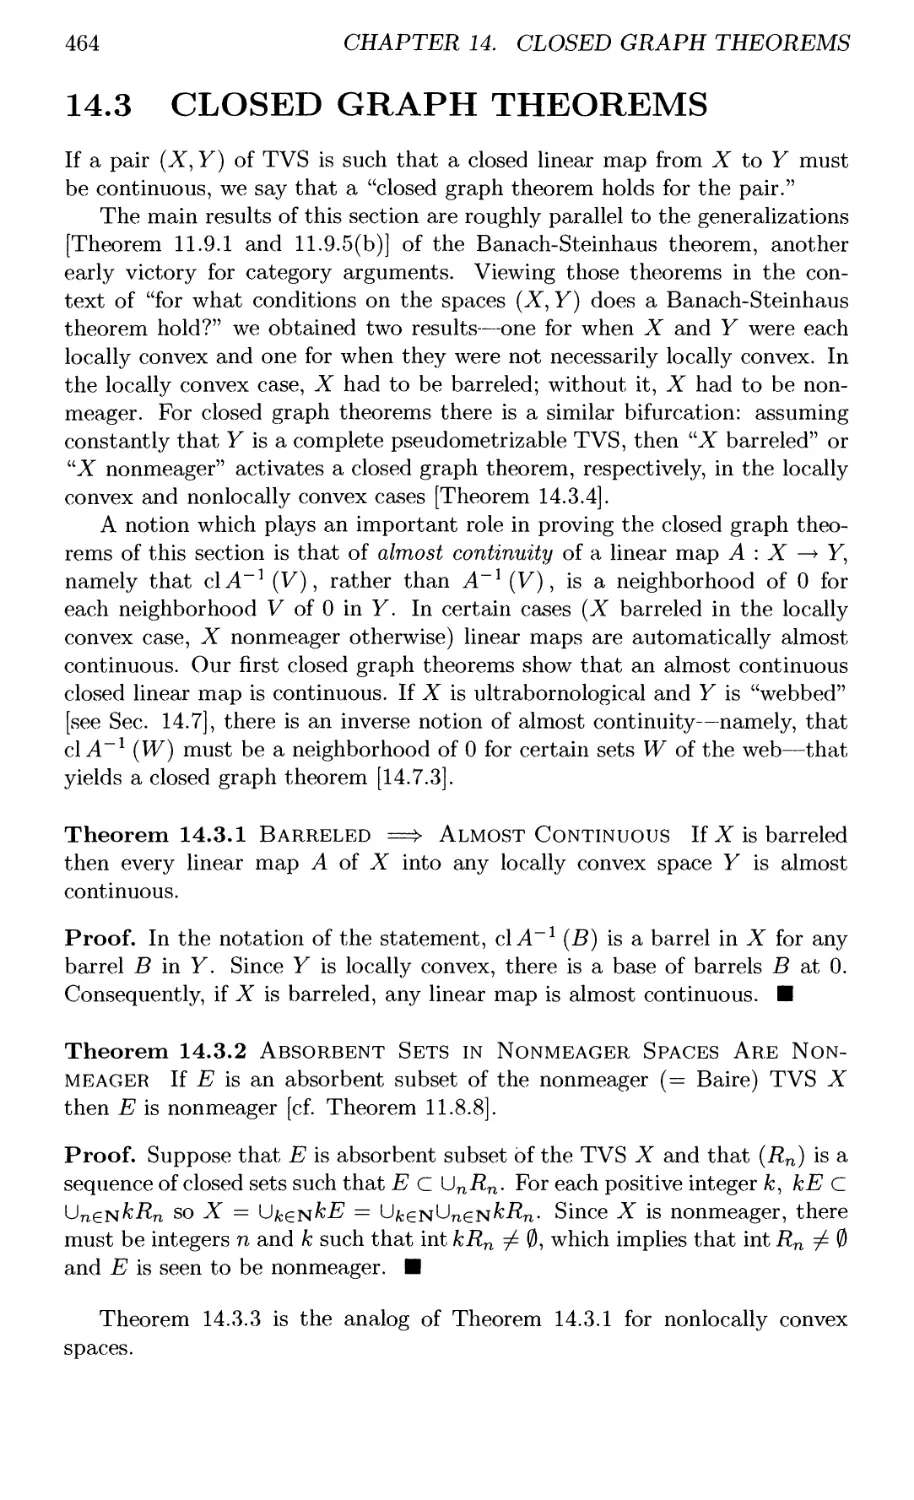 14.3 CLOSED GRAPH THEOREMS